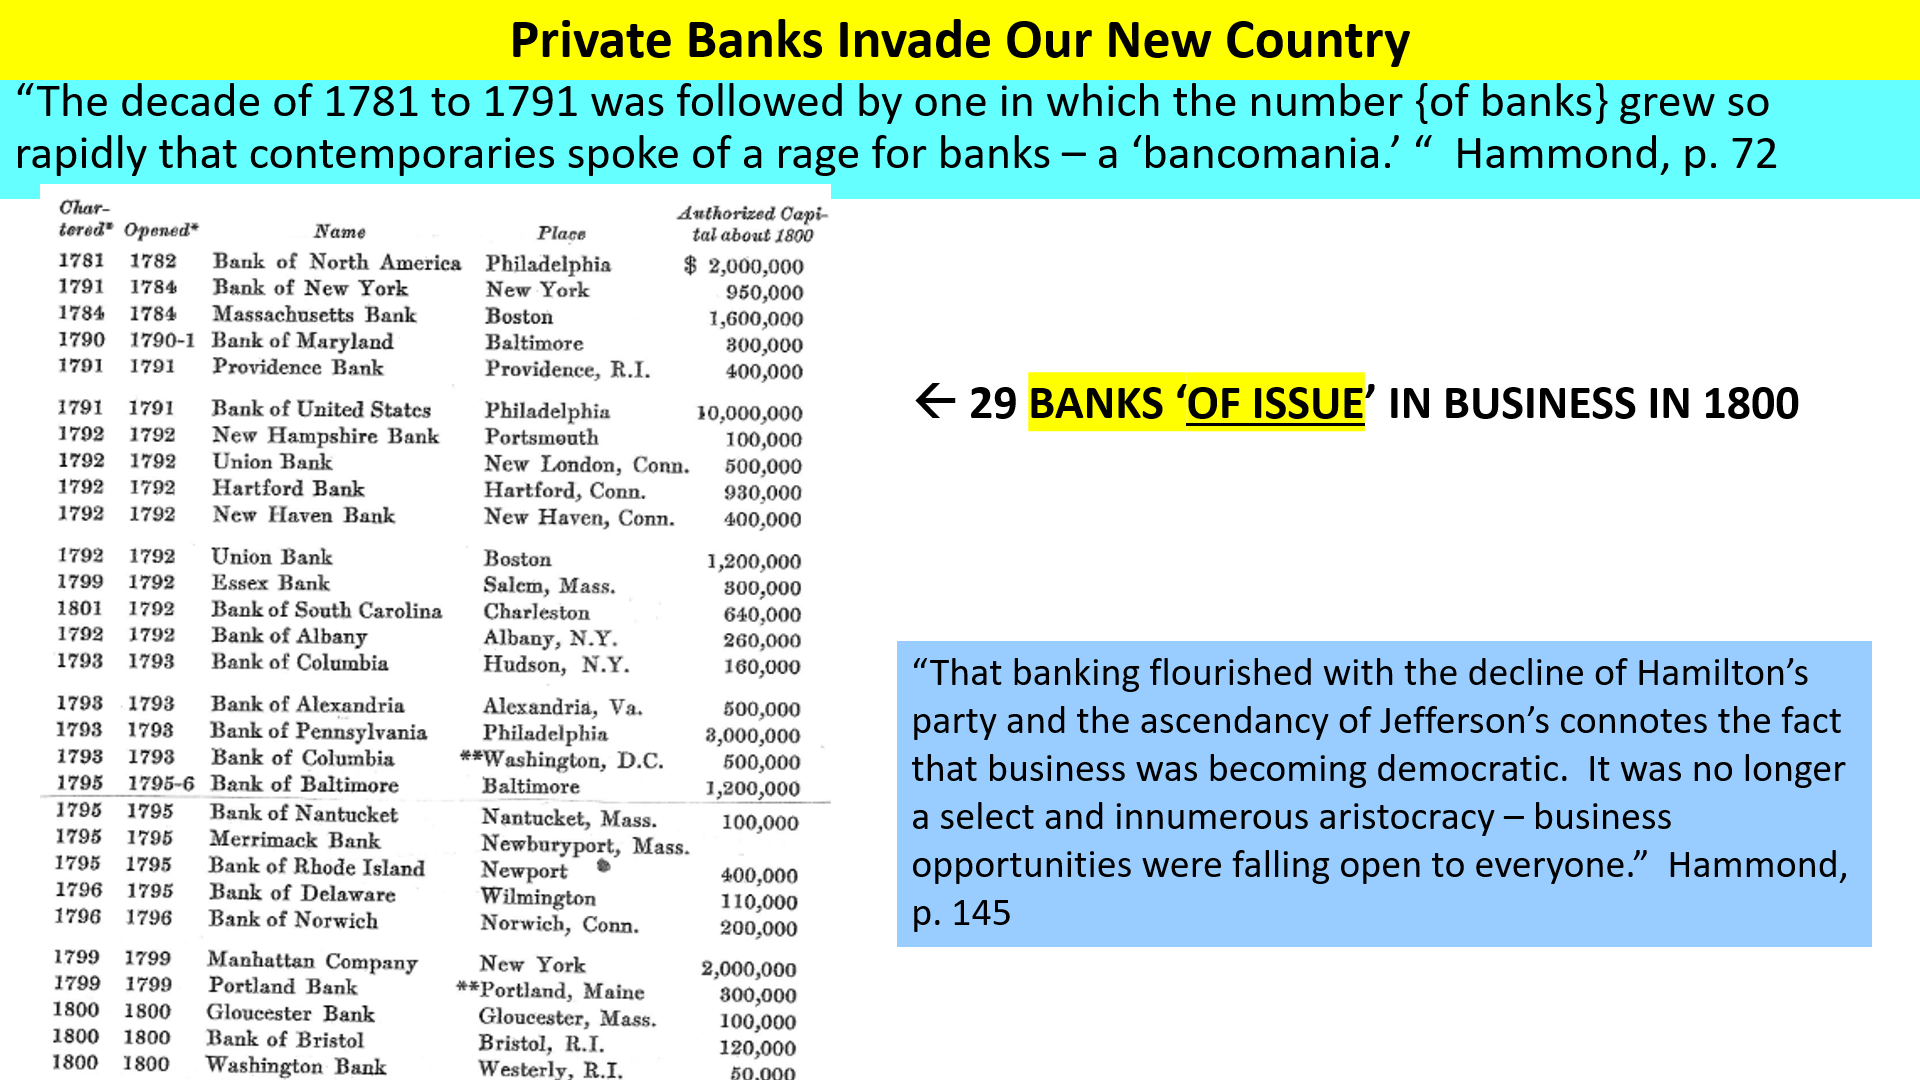 the number of nbanks of issue exploded in the 1790's